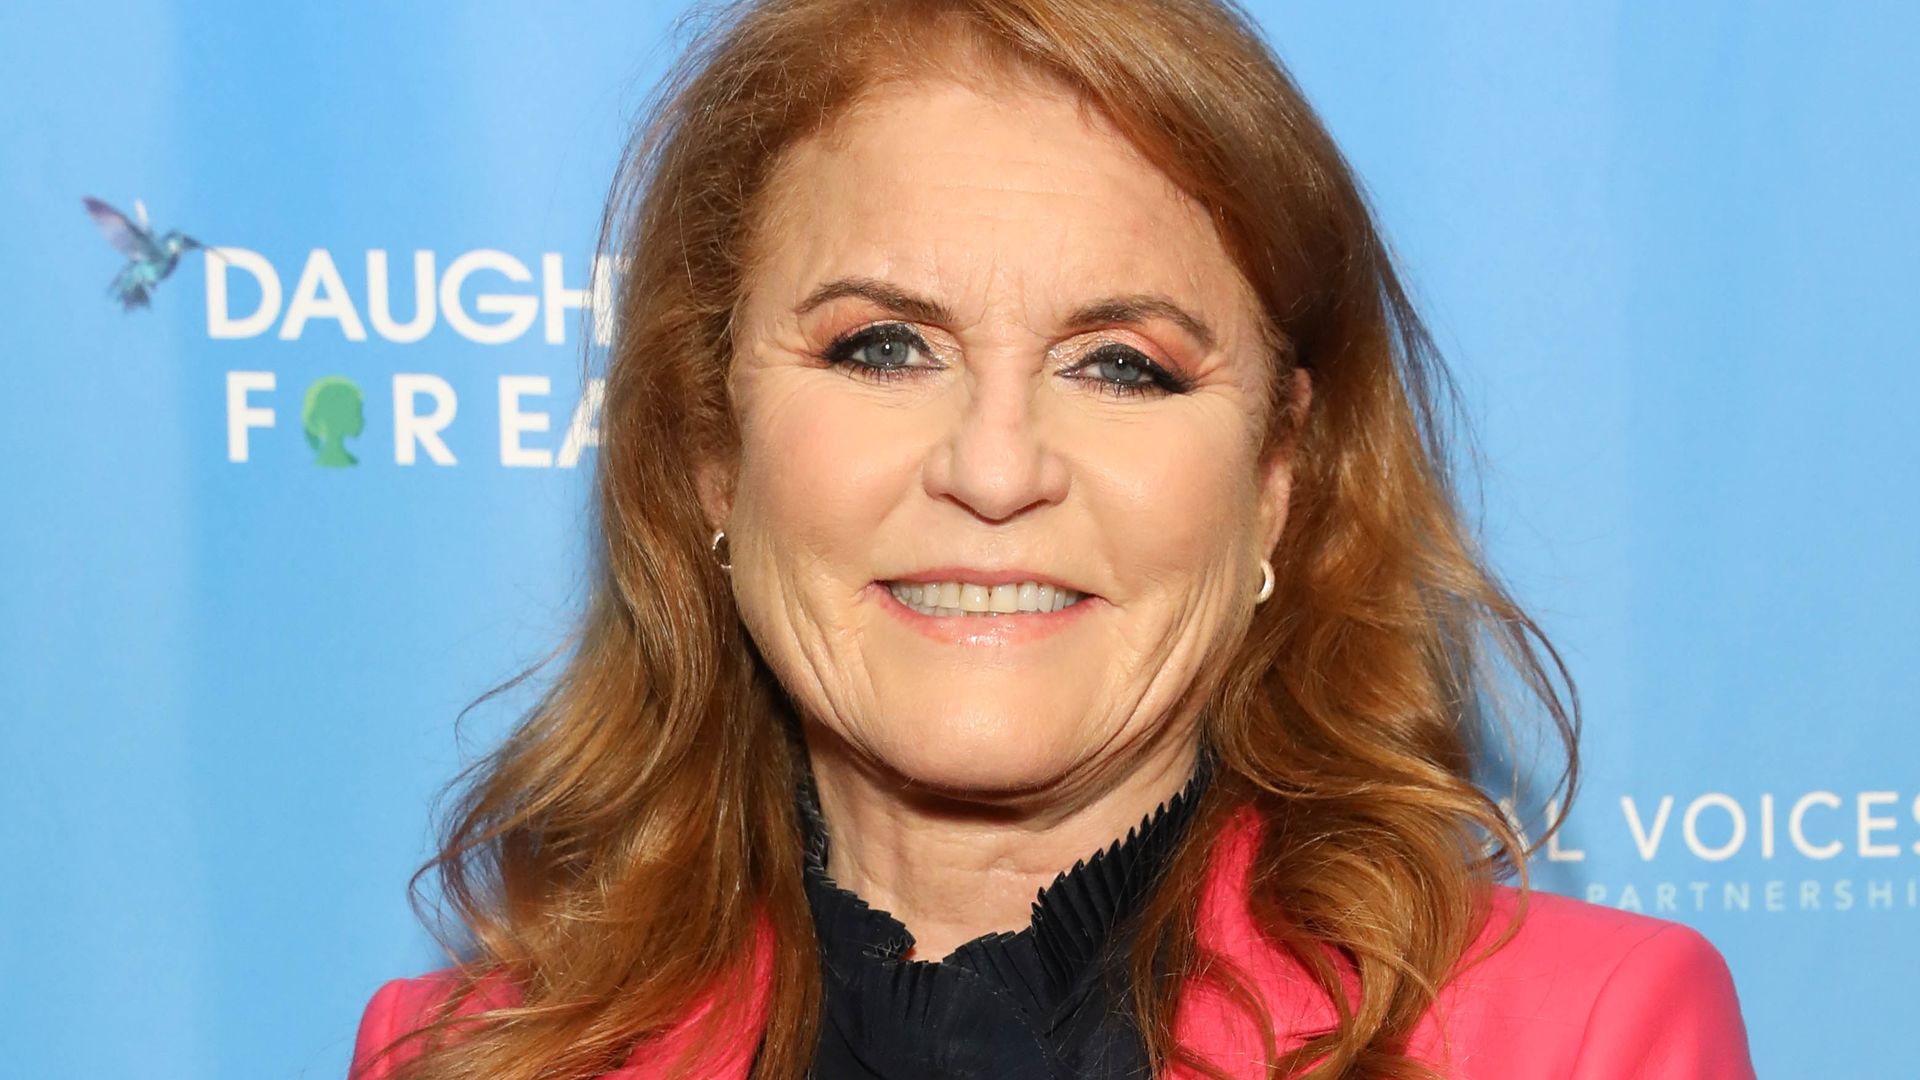 Sarah Ferguson, Duchess of York attends Daughters For Earth, Vital Voices and International Center For Research On Women Campaign Launch on September 19, 2023 in New York City. (Photo by JP Yim/Getty Images for Daughters For Earth)